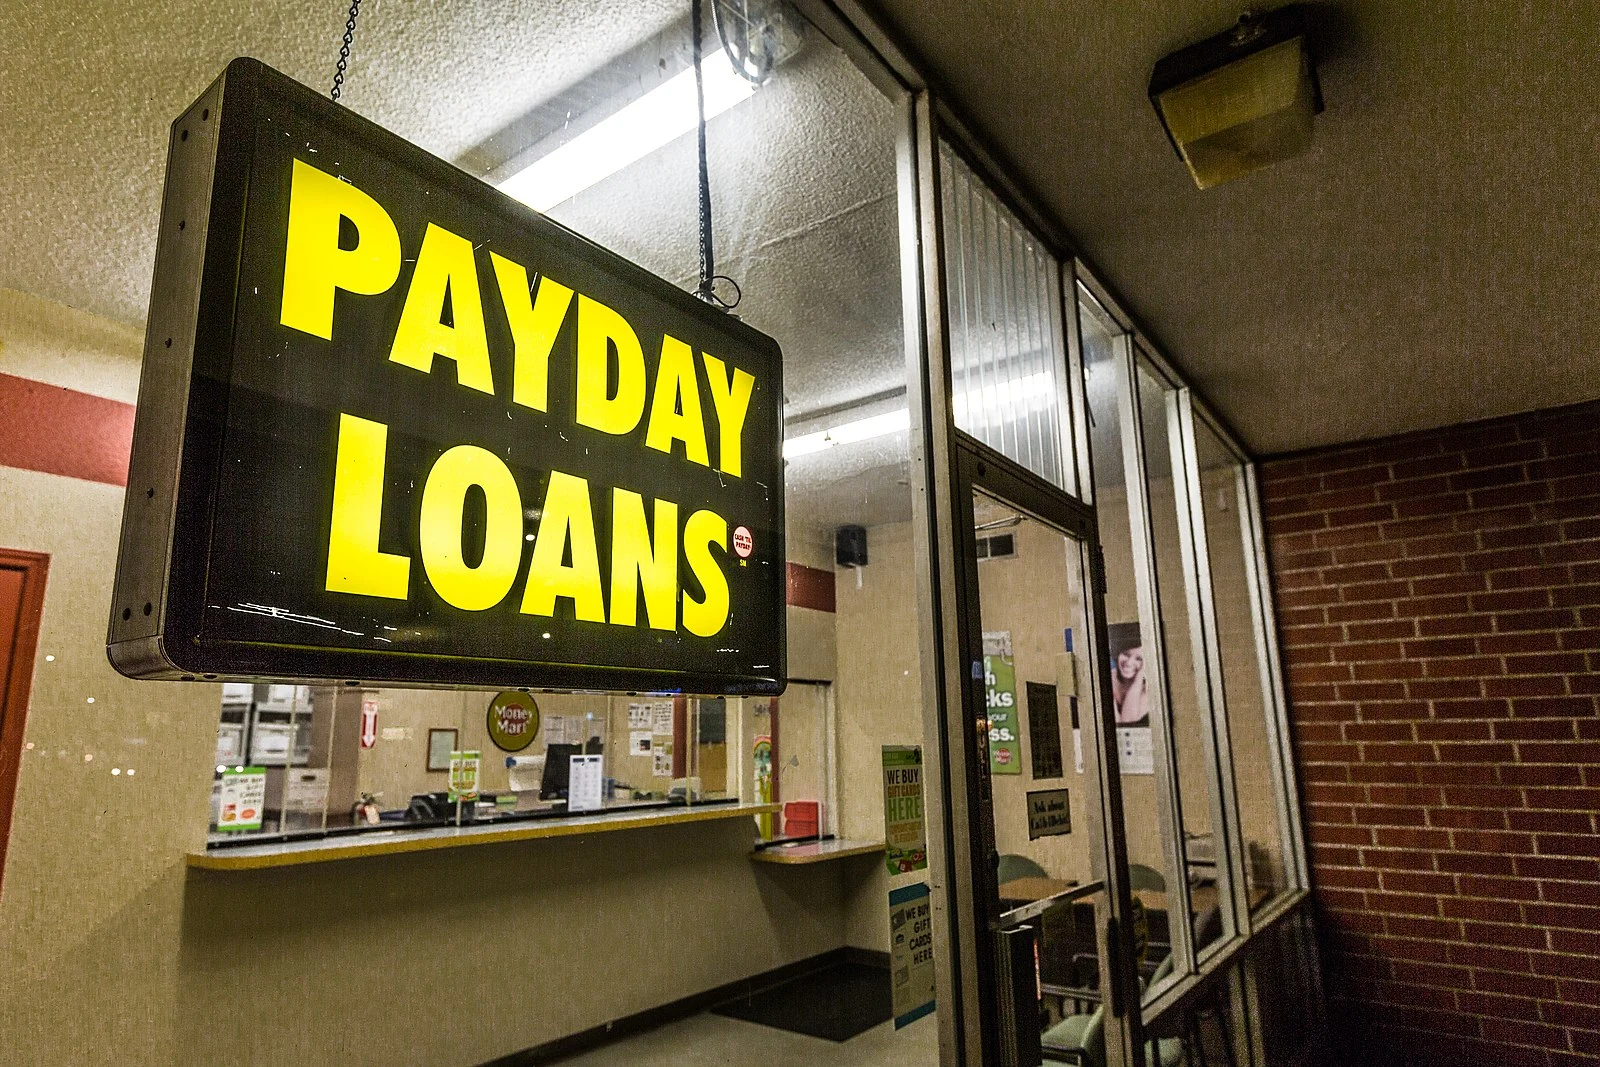 The Payday Loans Market